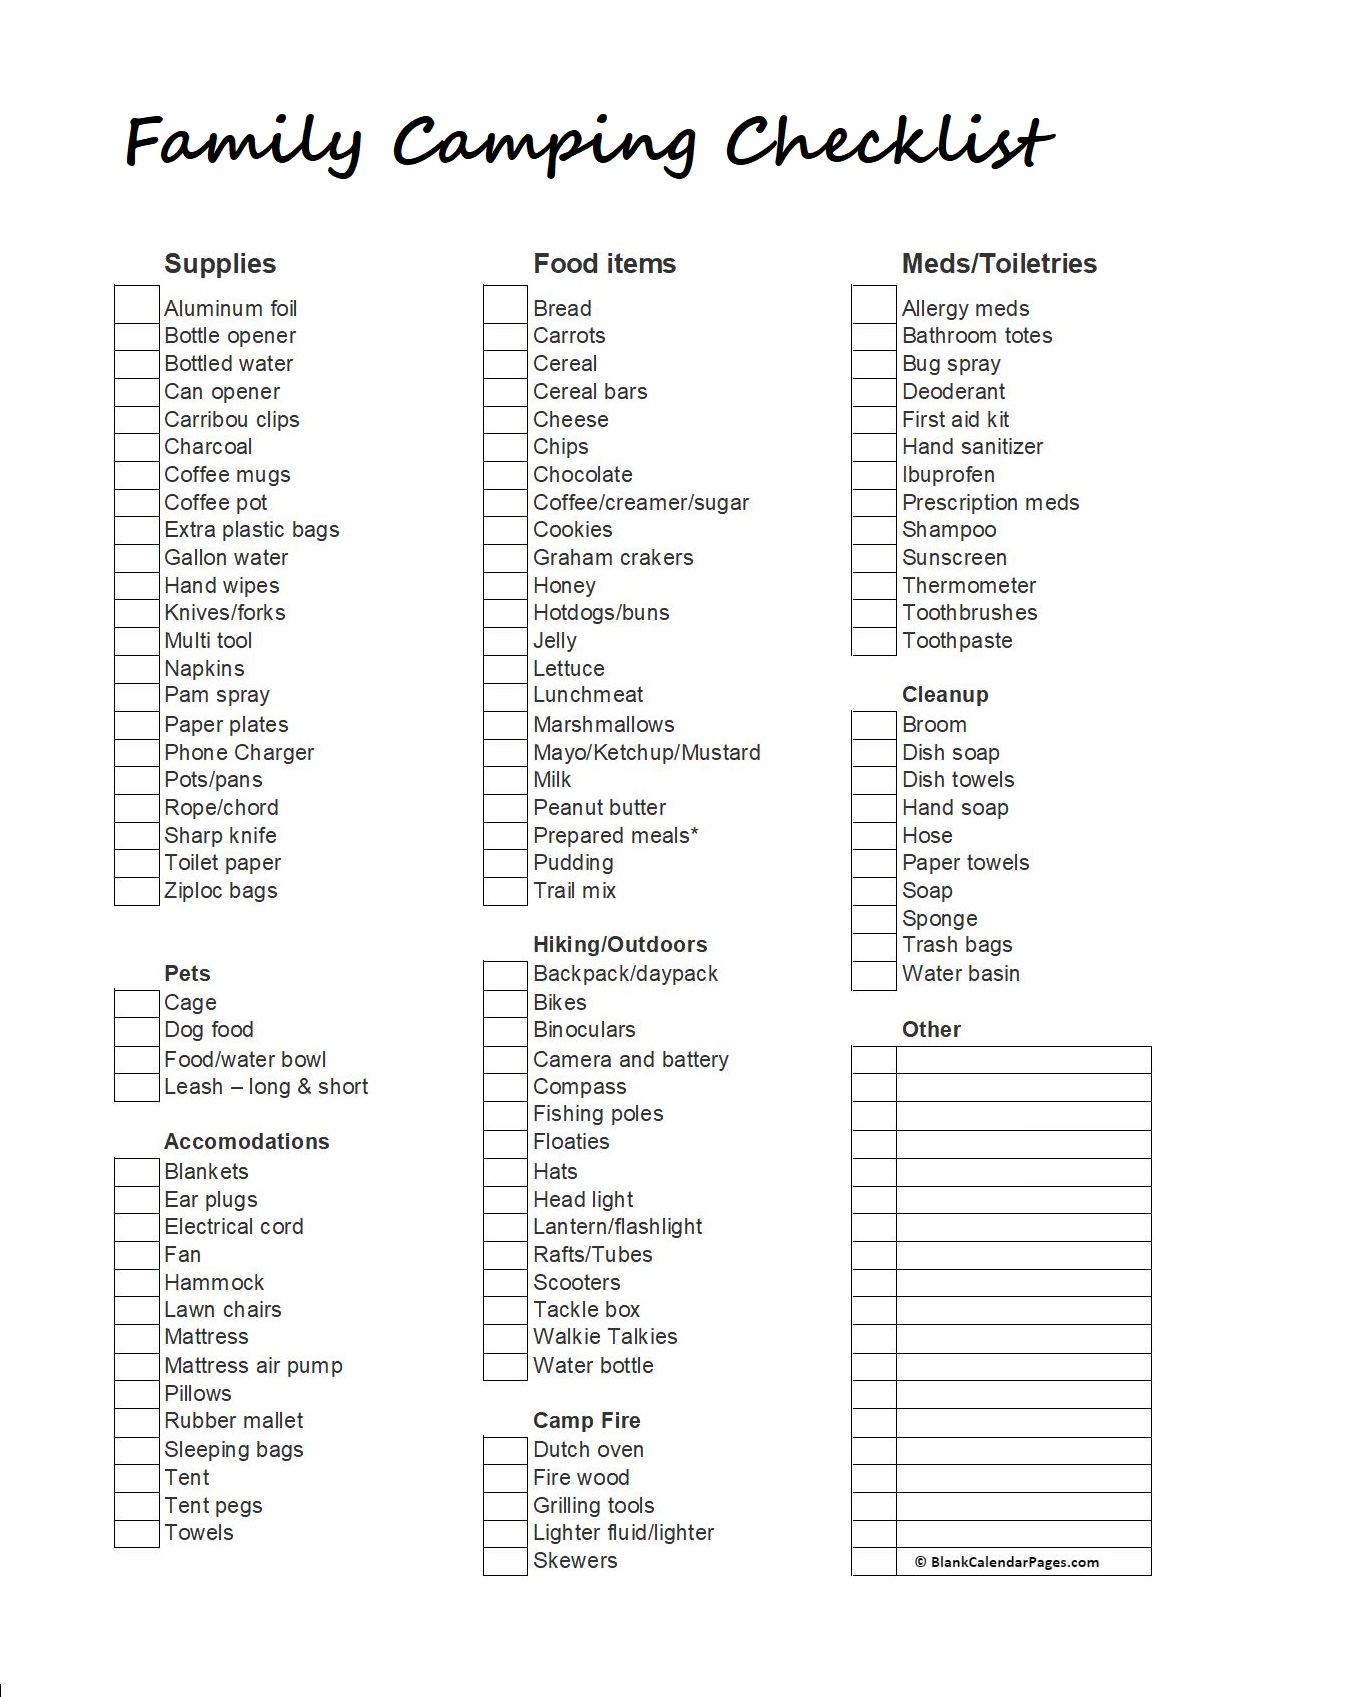 Camping packing list | Camping checklist